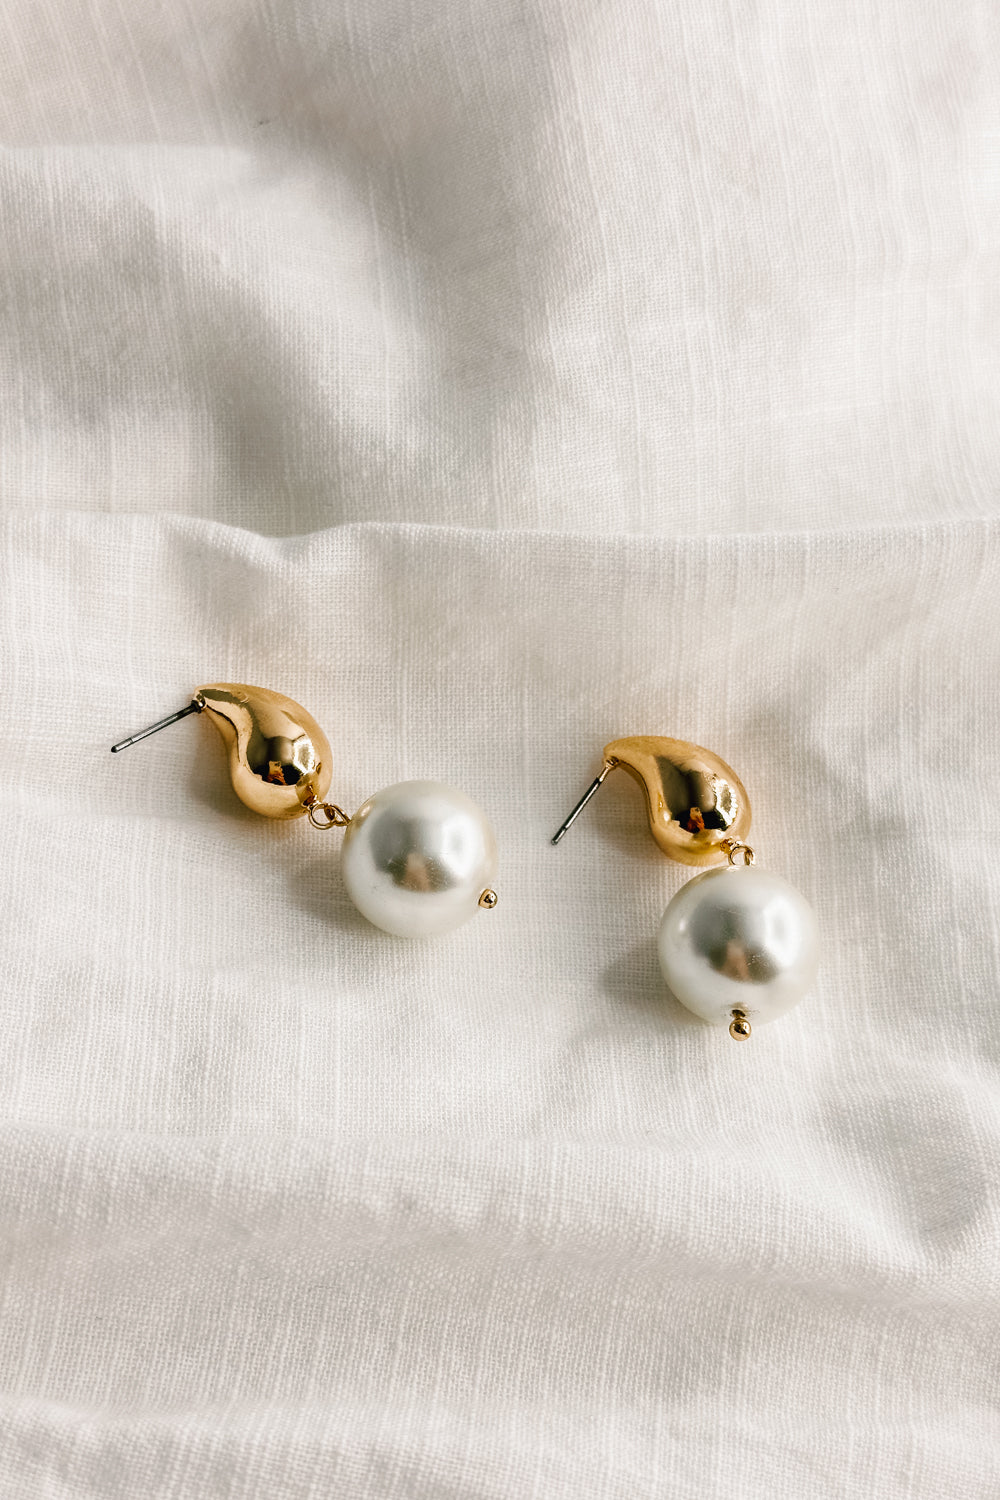 Flat lay view of the Julie Gold and Pearl Dangle Earring which features gold teardrop shape medallion linked with a pearl medallion